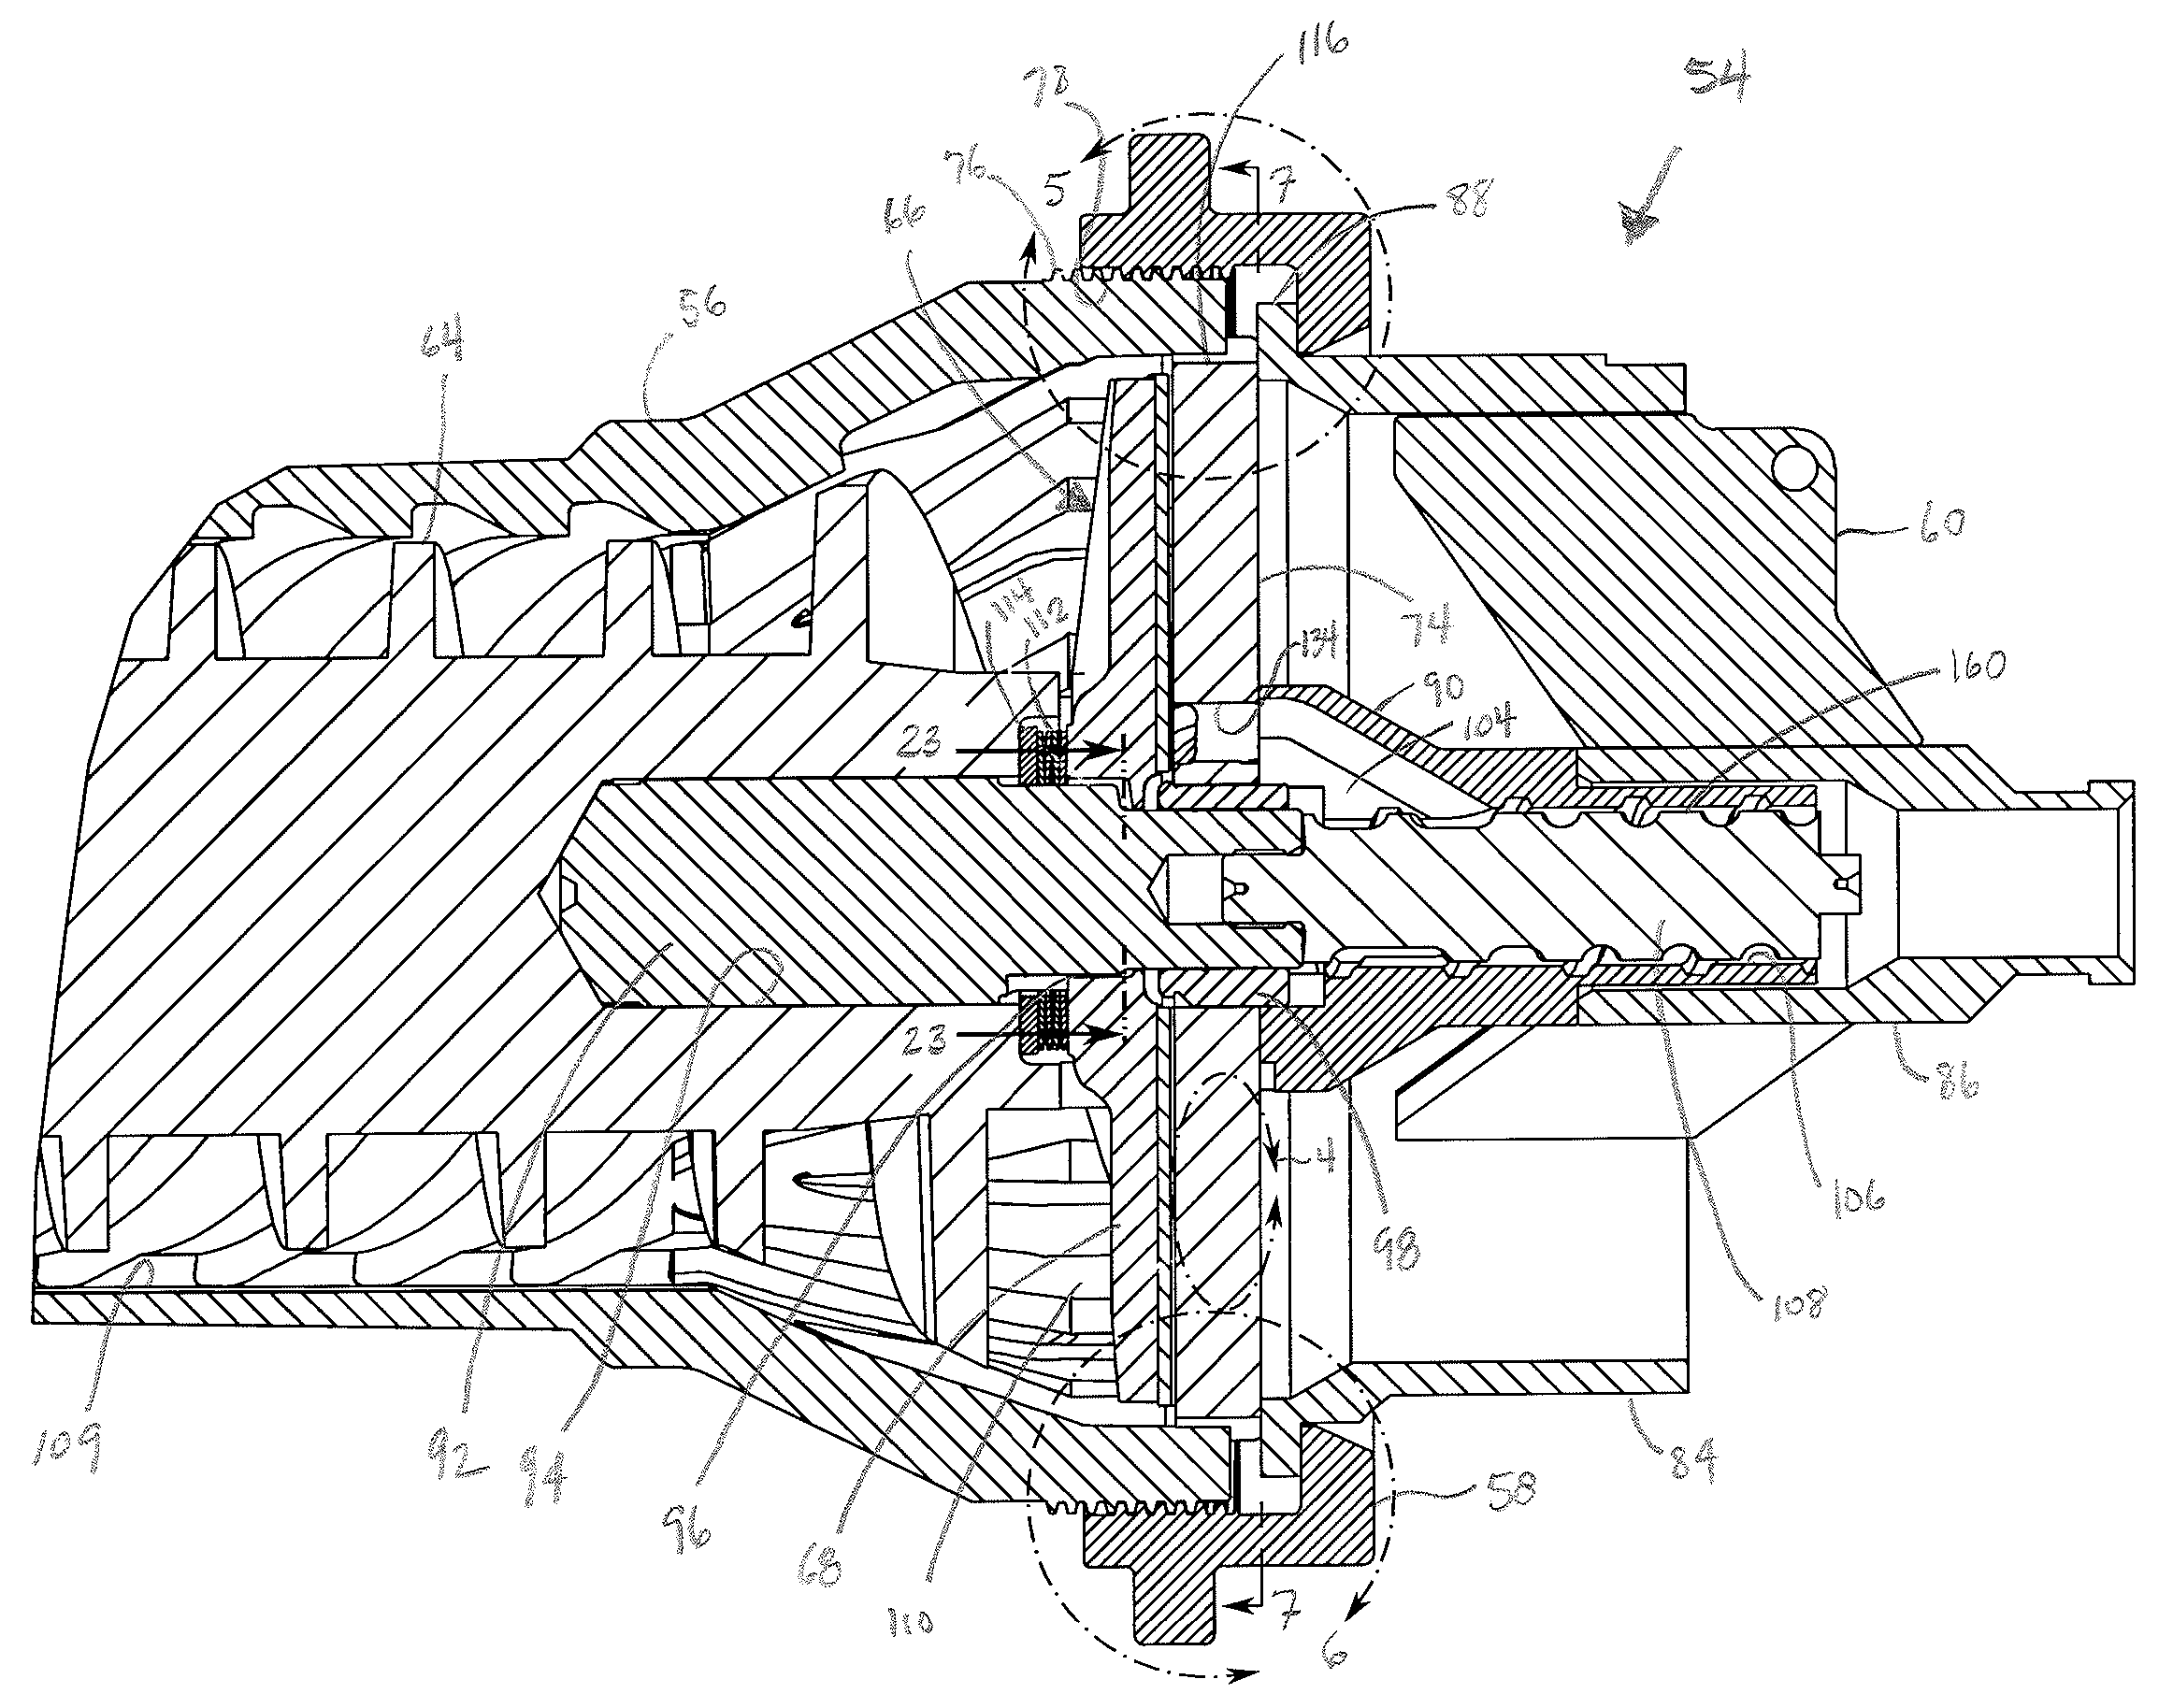 Fluted ramped entryways of an orifice plate for a grinding machine